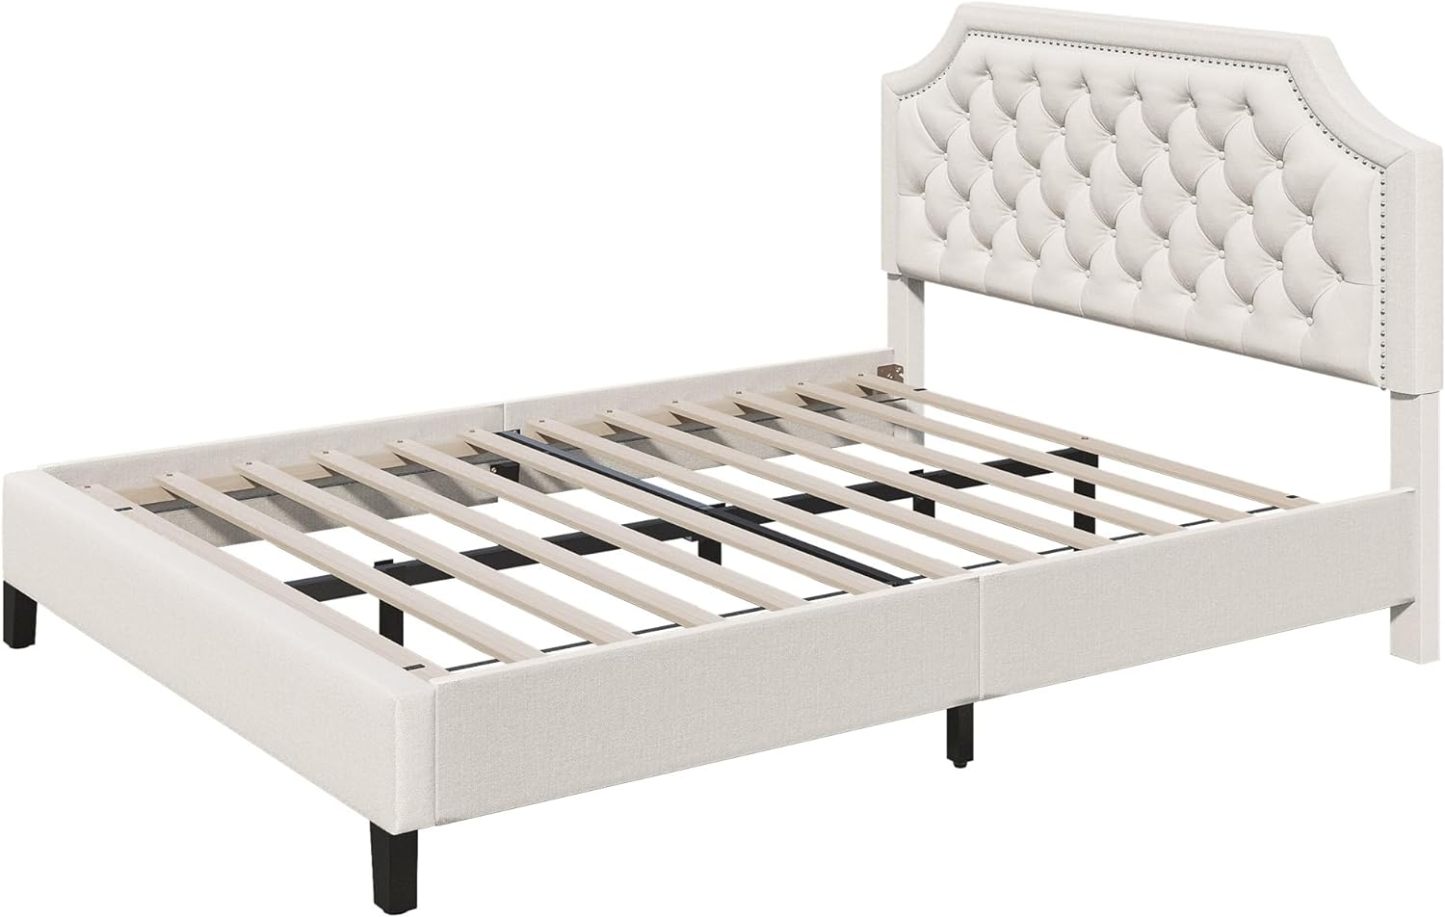 Queen Size Bed Frame with Adjustable Headboard